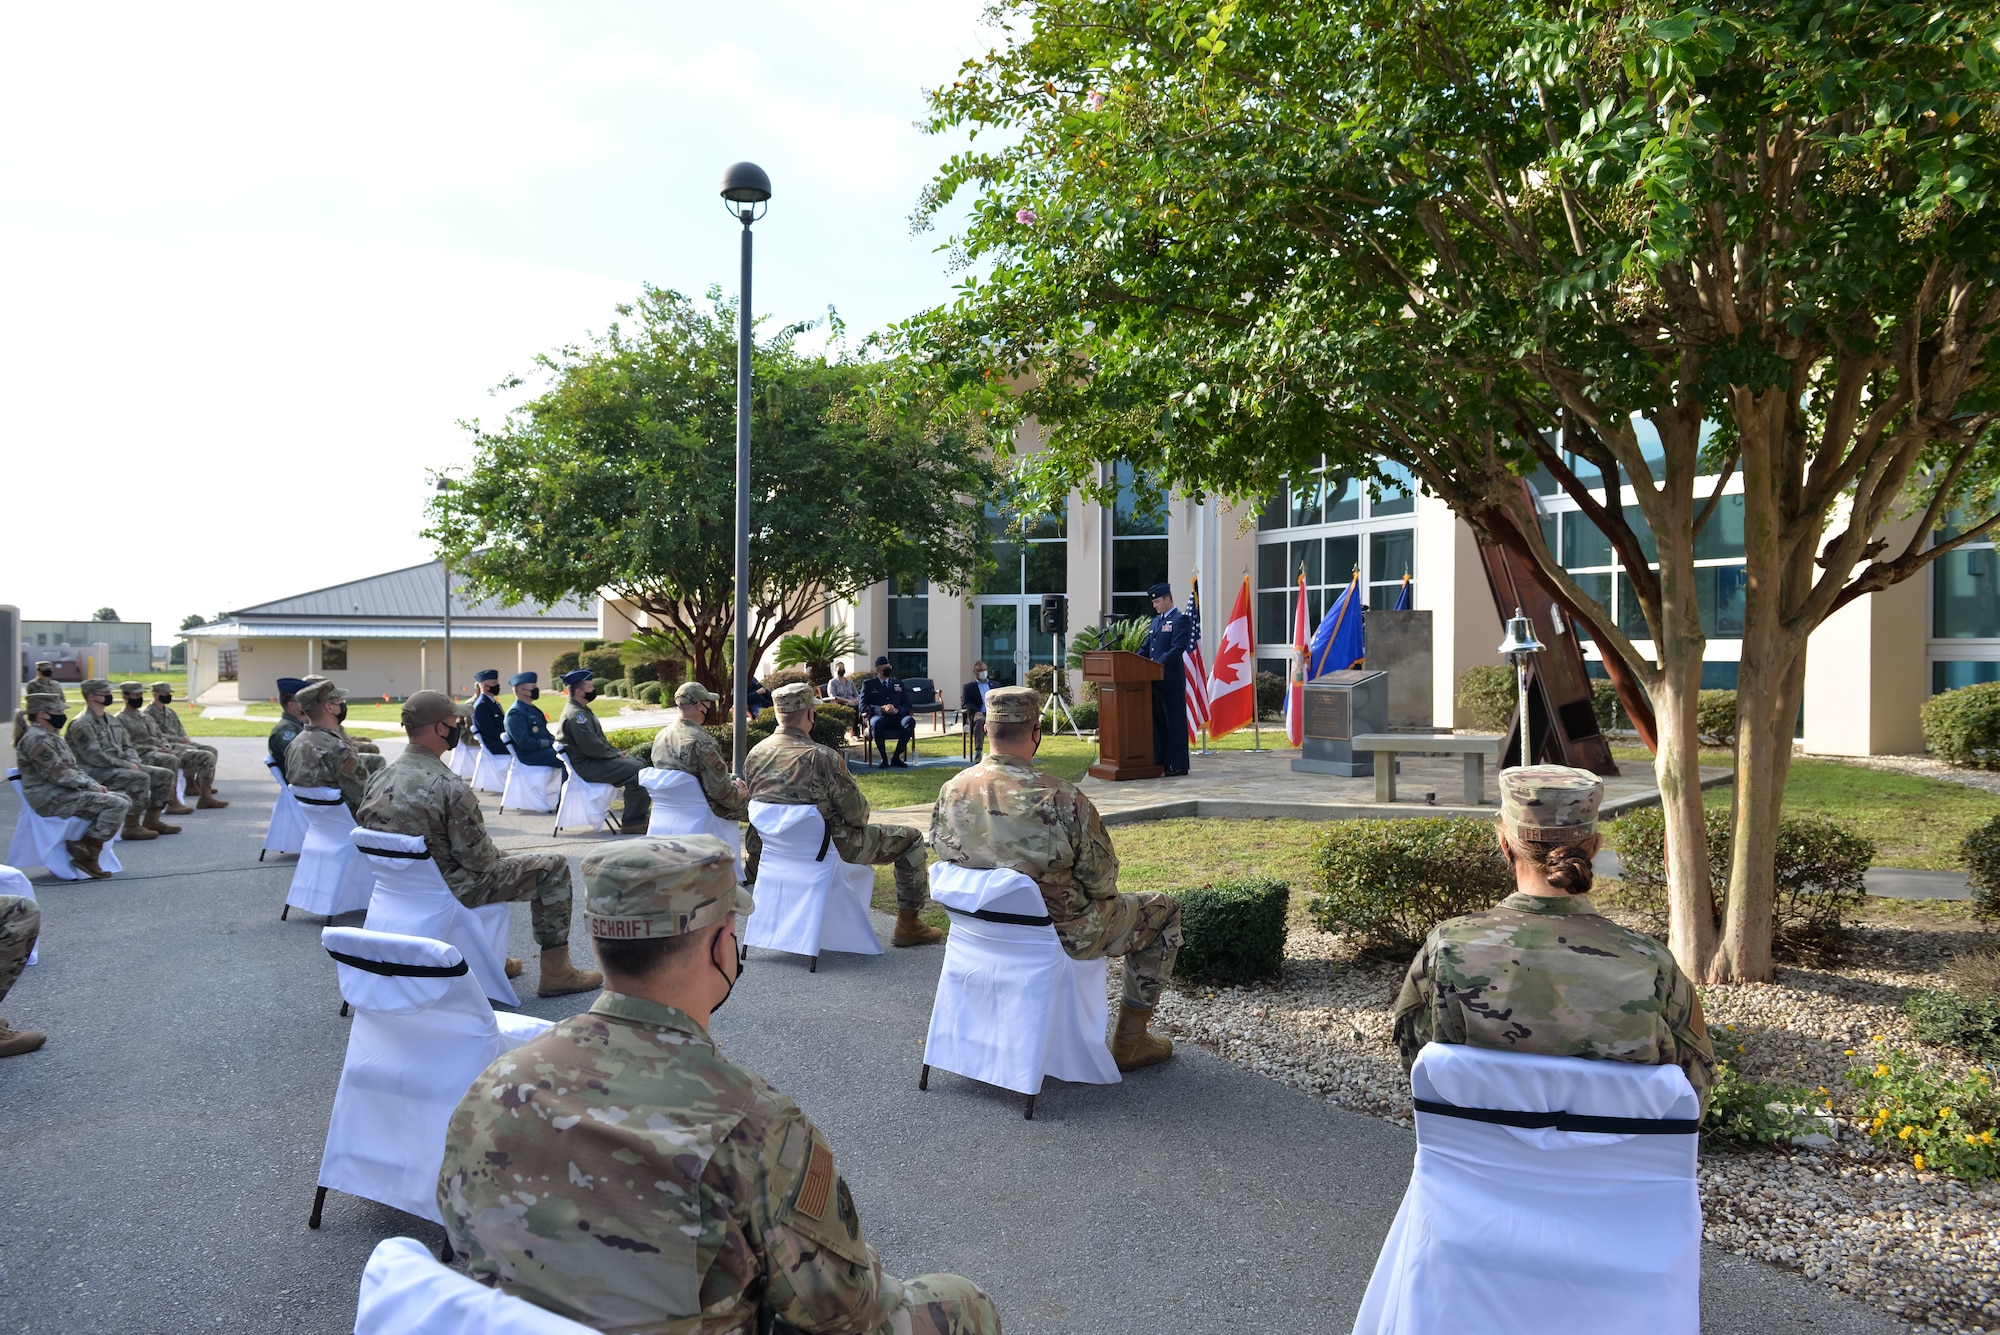 U.S. Air Force Maj. Frederick Diederich from the 601st Air Operations Center narrates the events of 9/11 to AOC and 1st Air Force members during a memorial service on September 10, 2021 at Tyndall Air Force Base, Fla. The 601st AOC held a ceremony to honor the memory of those who lost their lives as a result of the tragic events of September 11, 2001 (Air National Guard photo by, Master Sgt. Regina Young)